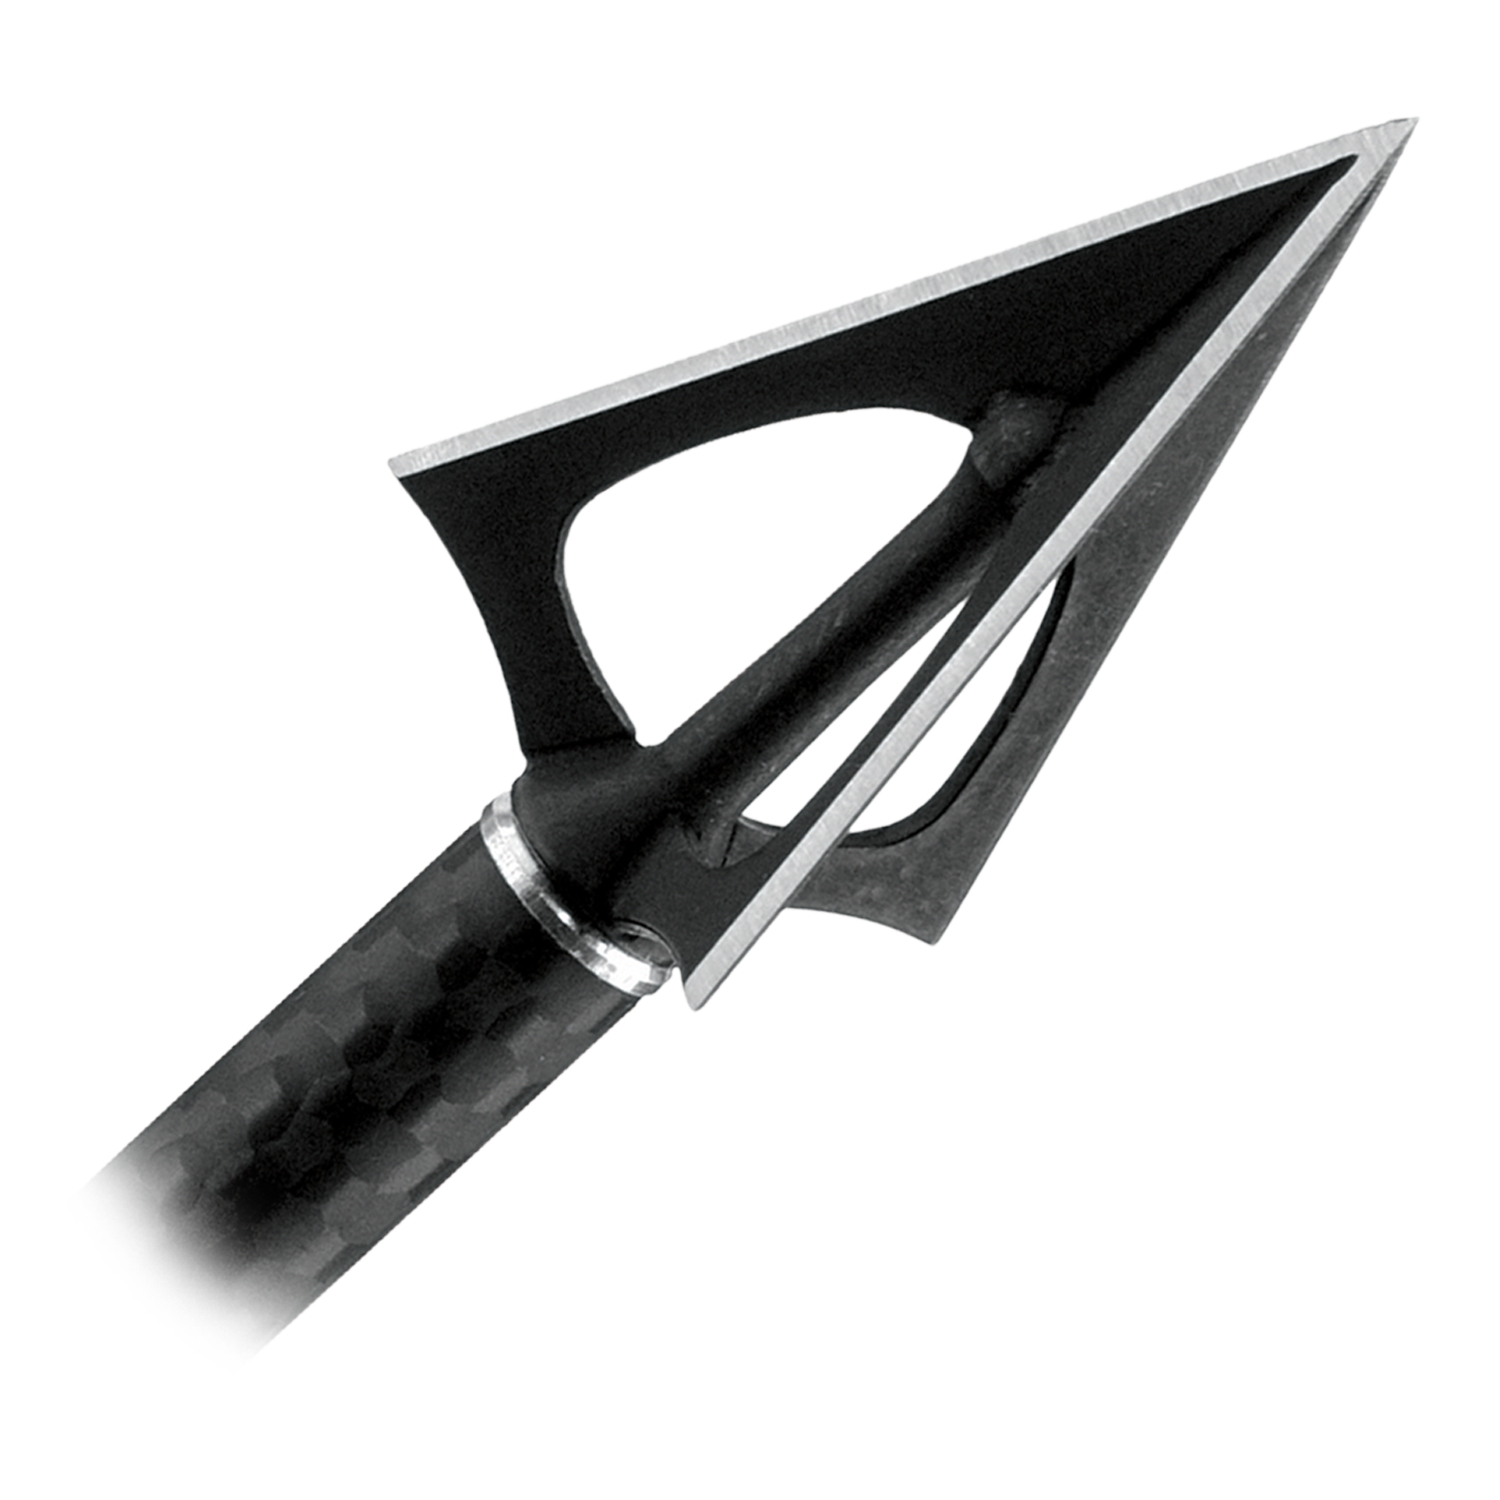 BlackOut FXD Cut-On-Contact Fixed-Blade Broadhead